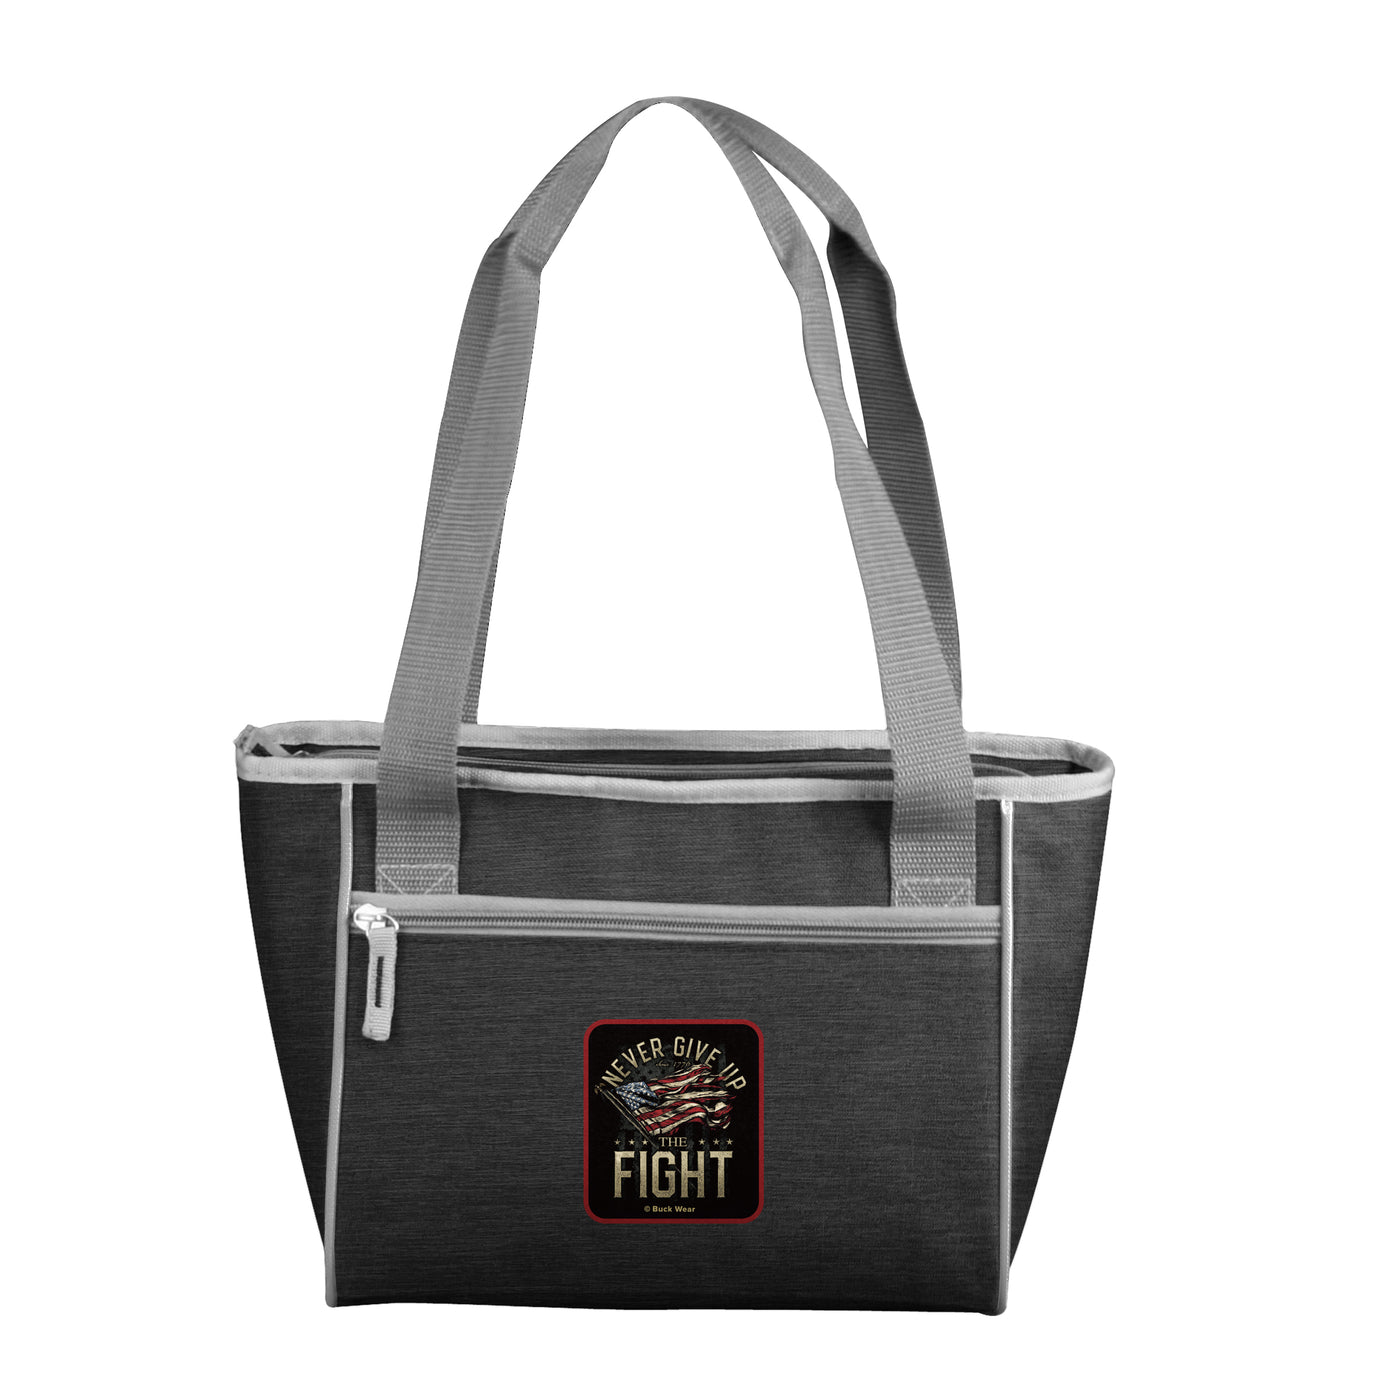 Never Give Up 16 Can Cooler Tote